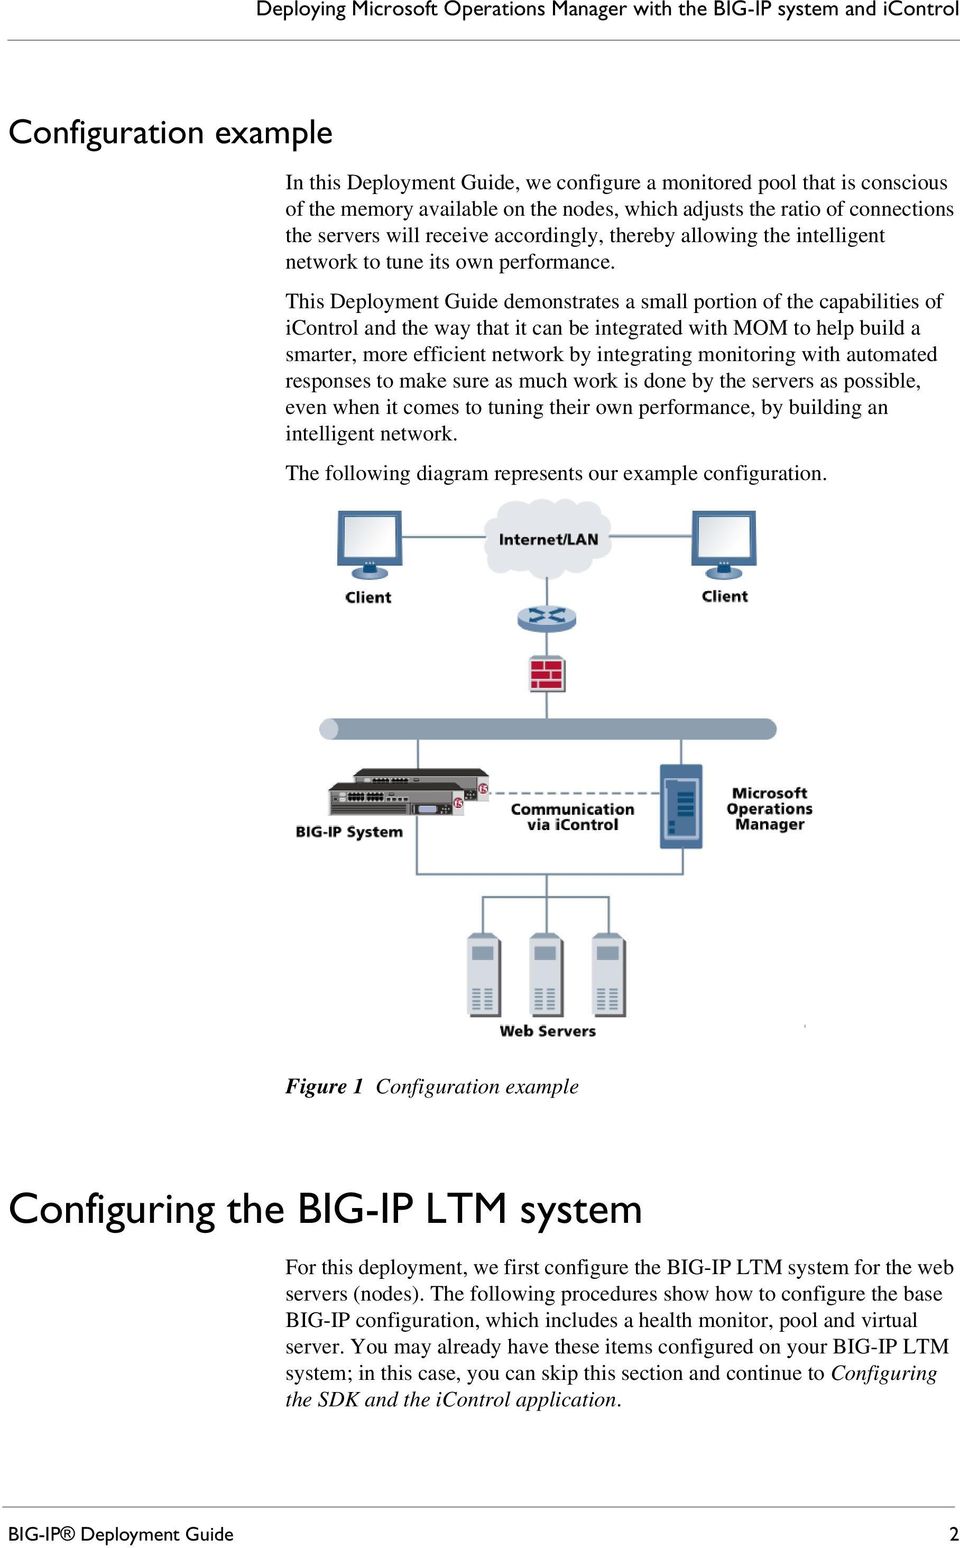 This Deployment Guide demonstrates a small portion of the capabilities of icontrol and the way that it can be integrated with MOM to help build a smarter, more efficient network by integrating